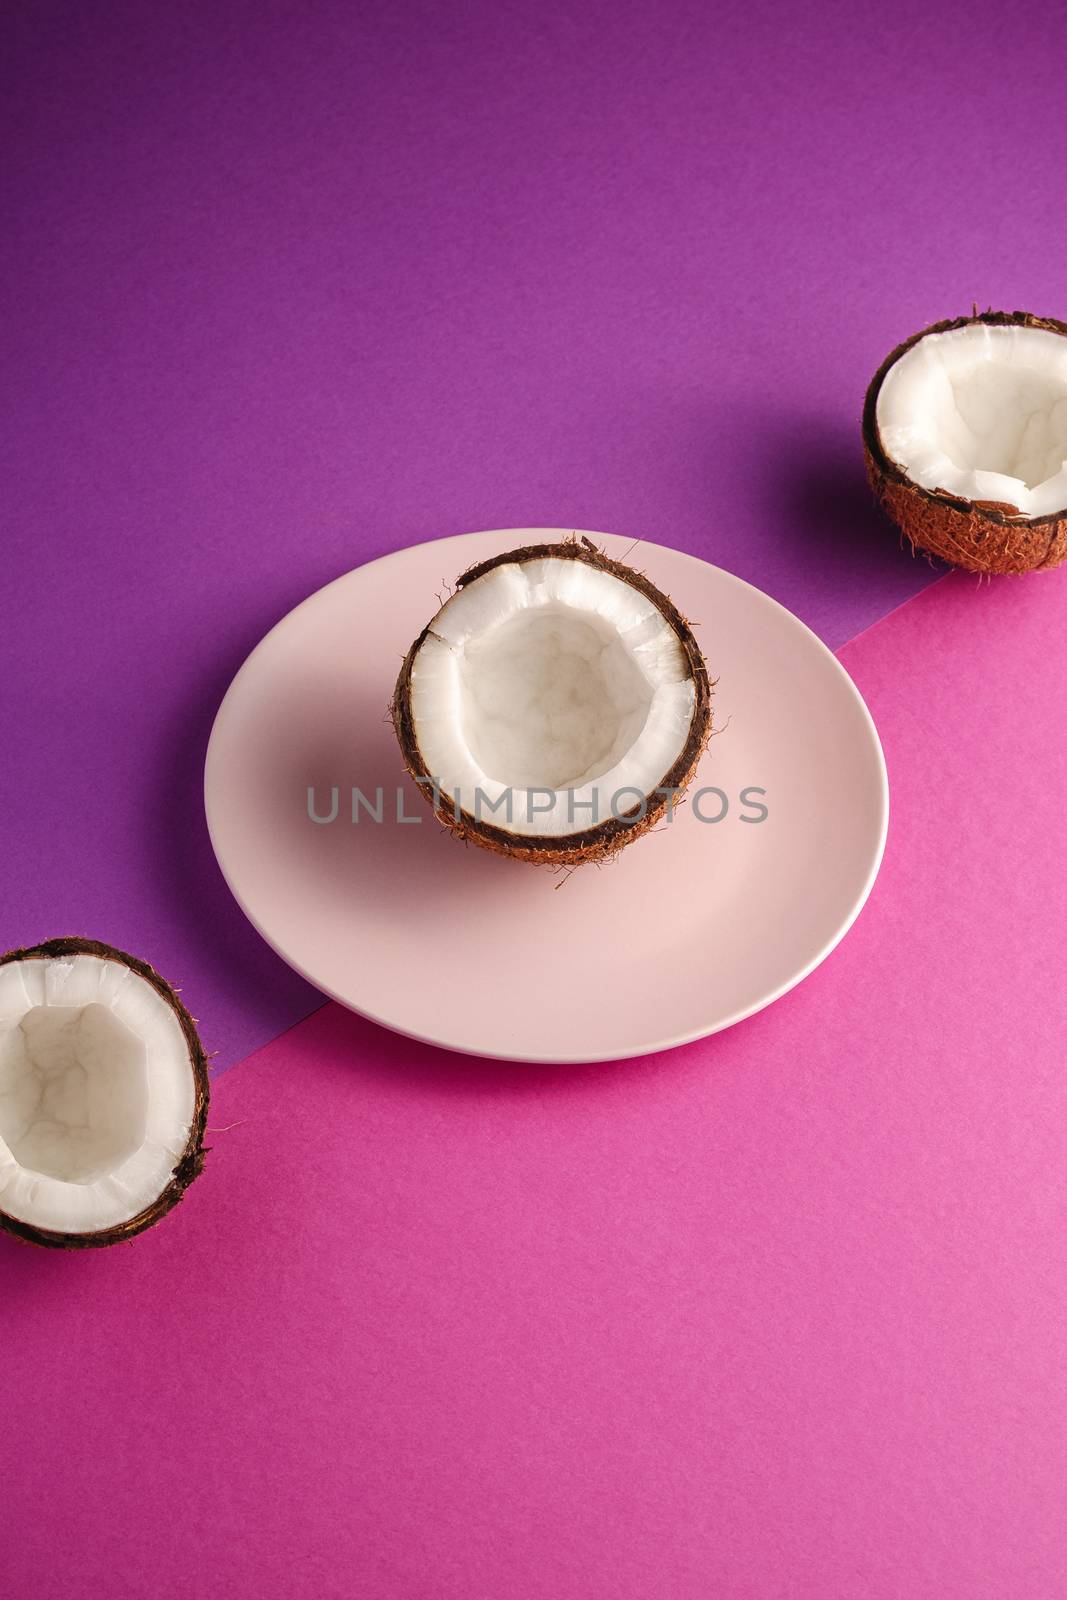 Coconut half in pink plate with nut fruits on violet and purple plain background, abstract food tropical concept, angle view